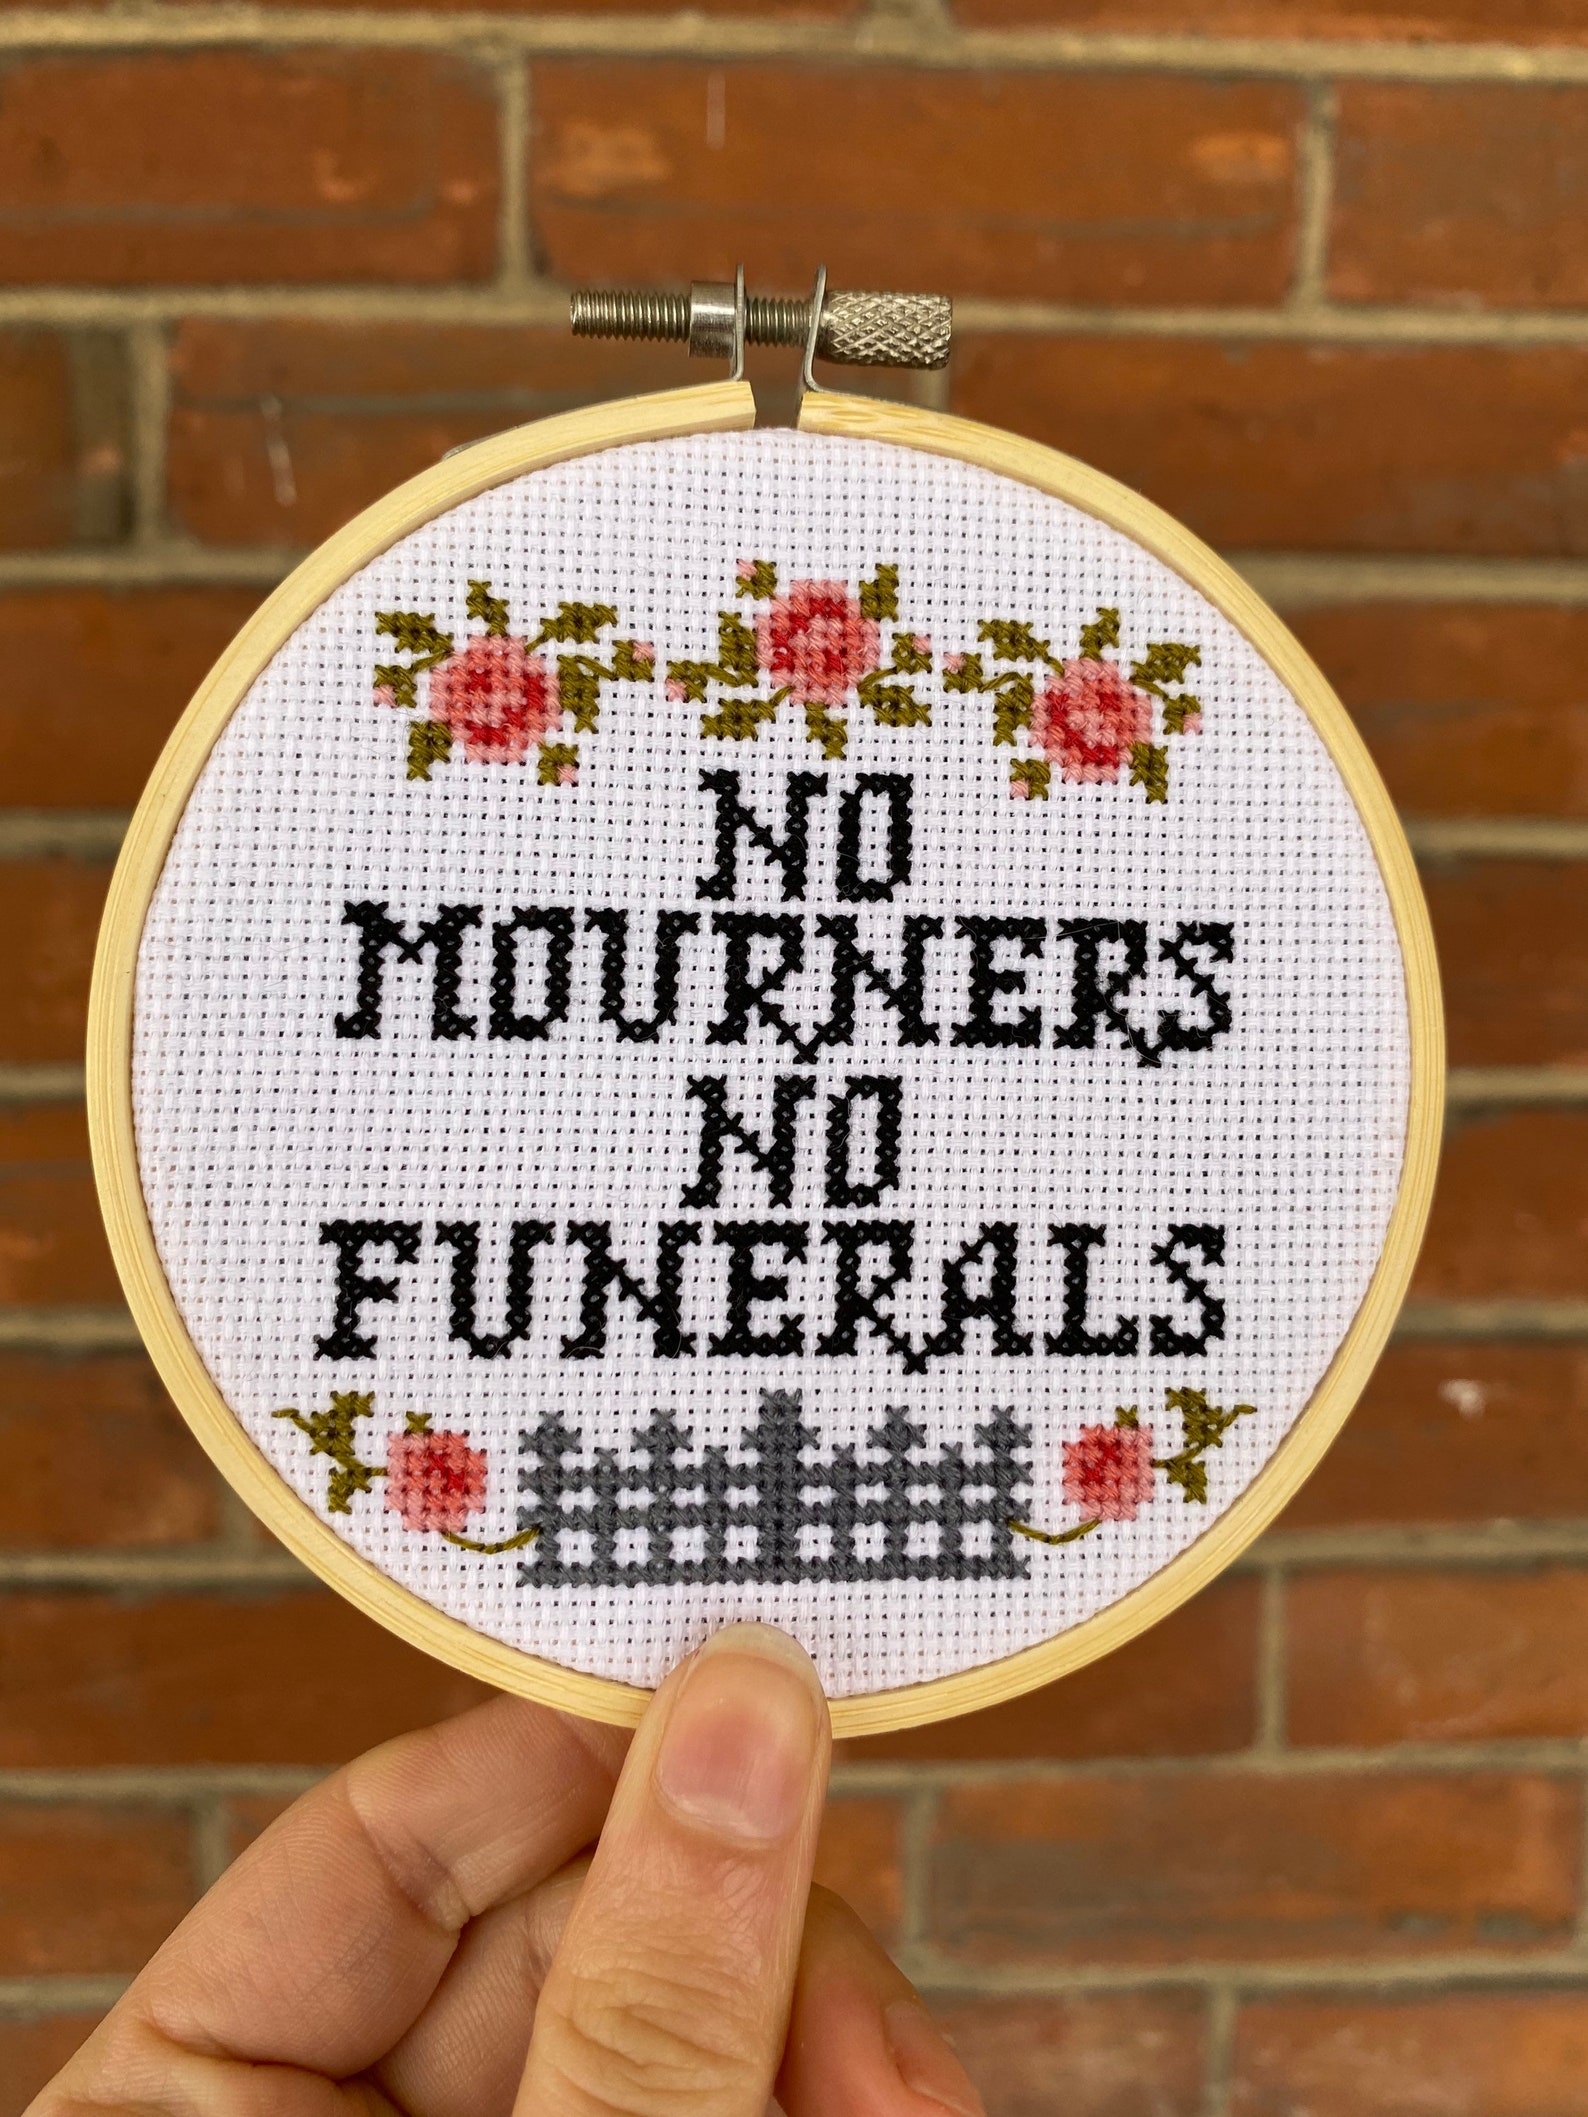 Circular hoop cross stitch with "no mourners no funerals" at the center and decorated with roses